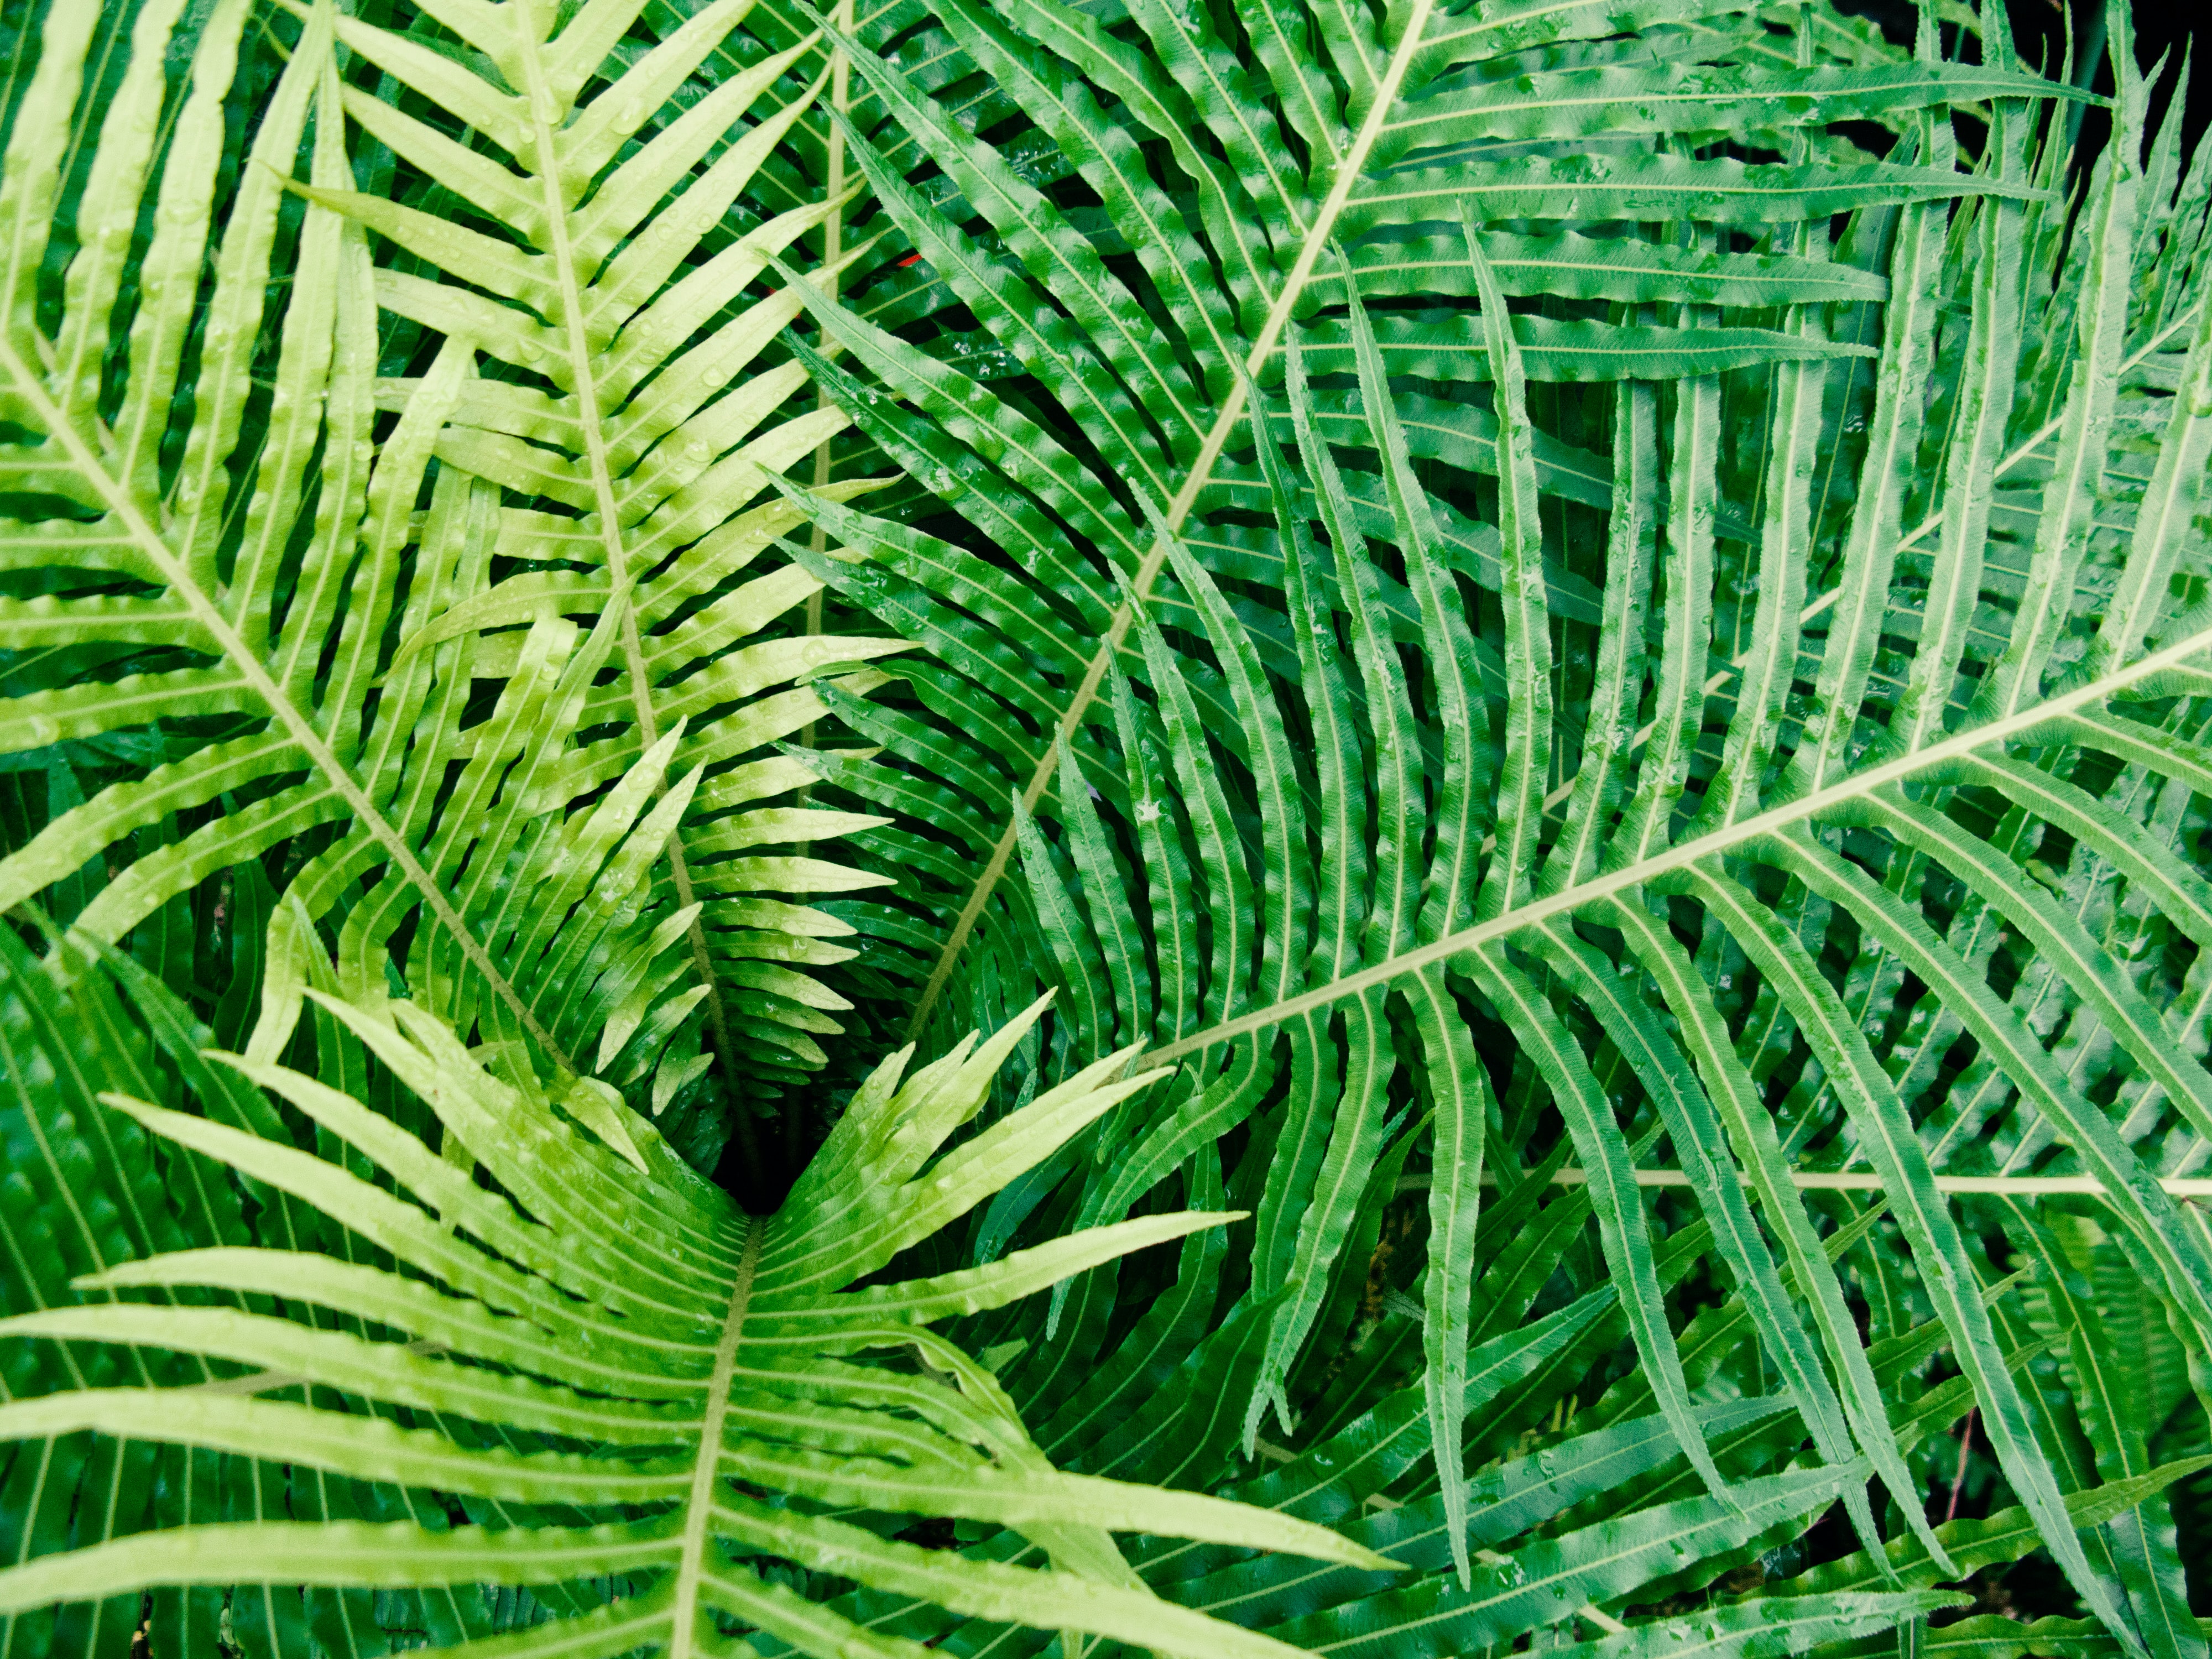 Photograph of leaves